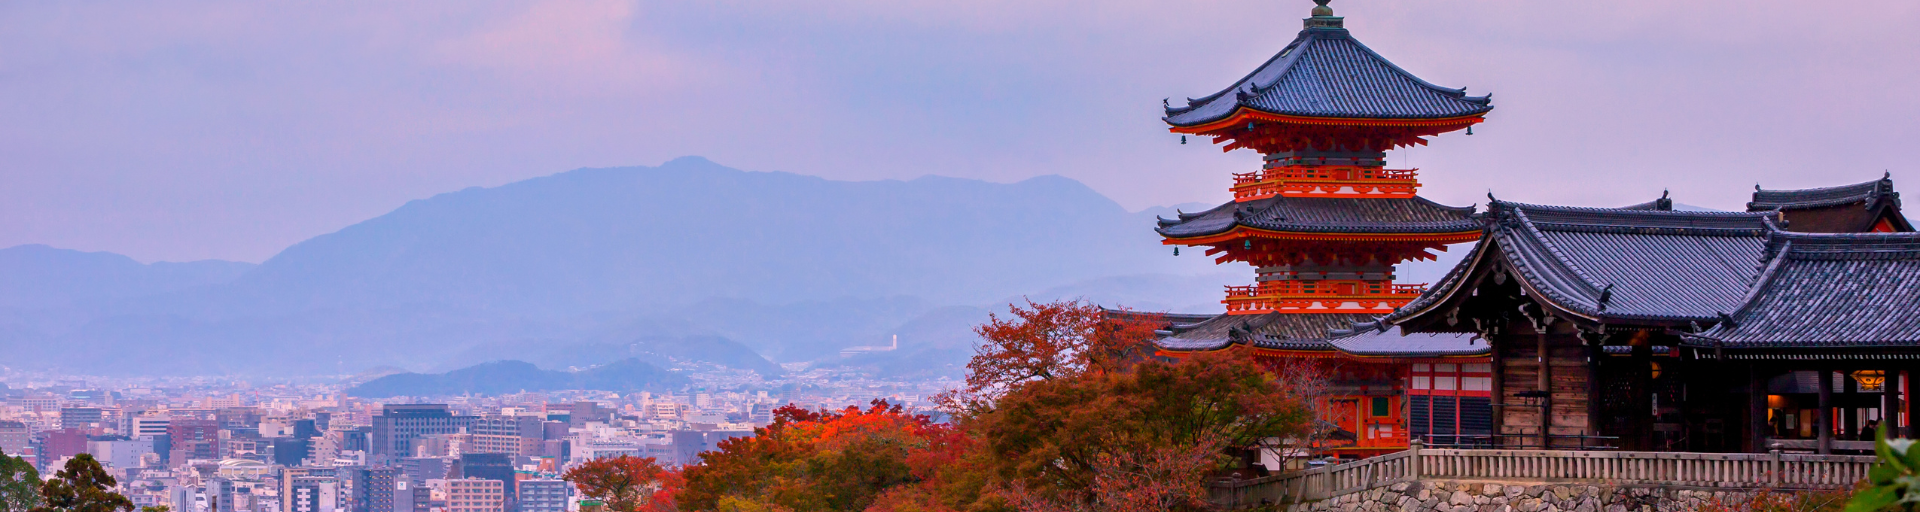 A view of Kyoto on the Global Network program